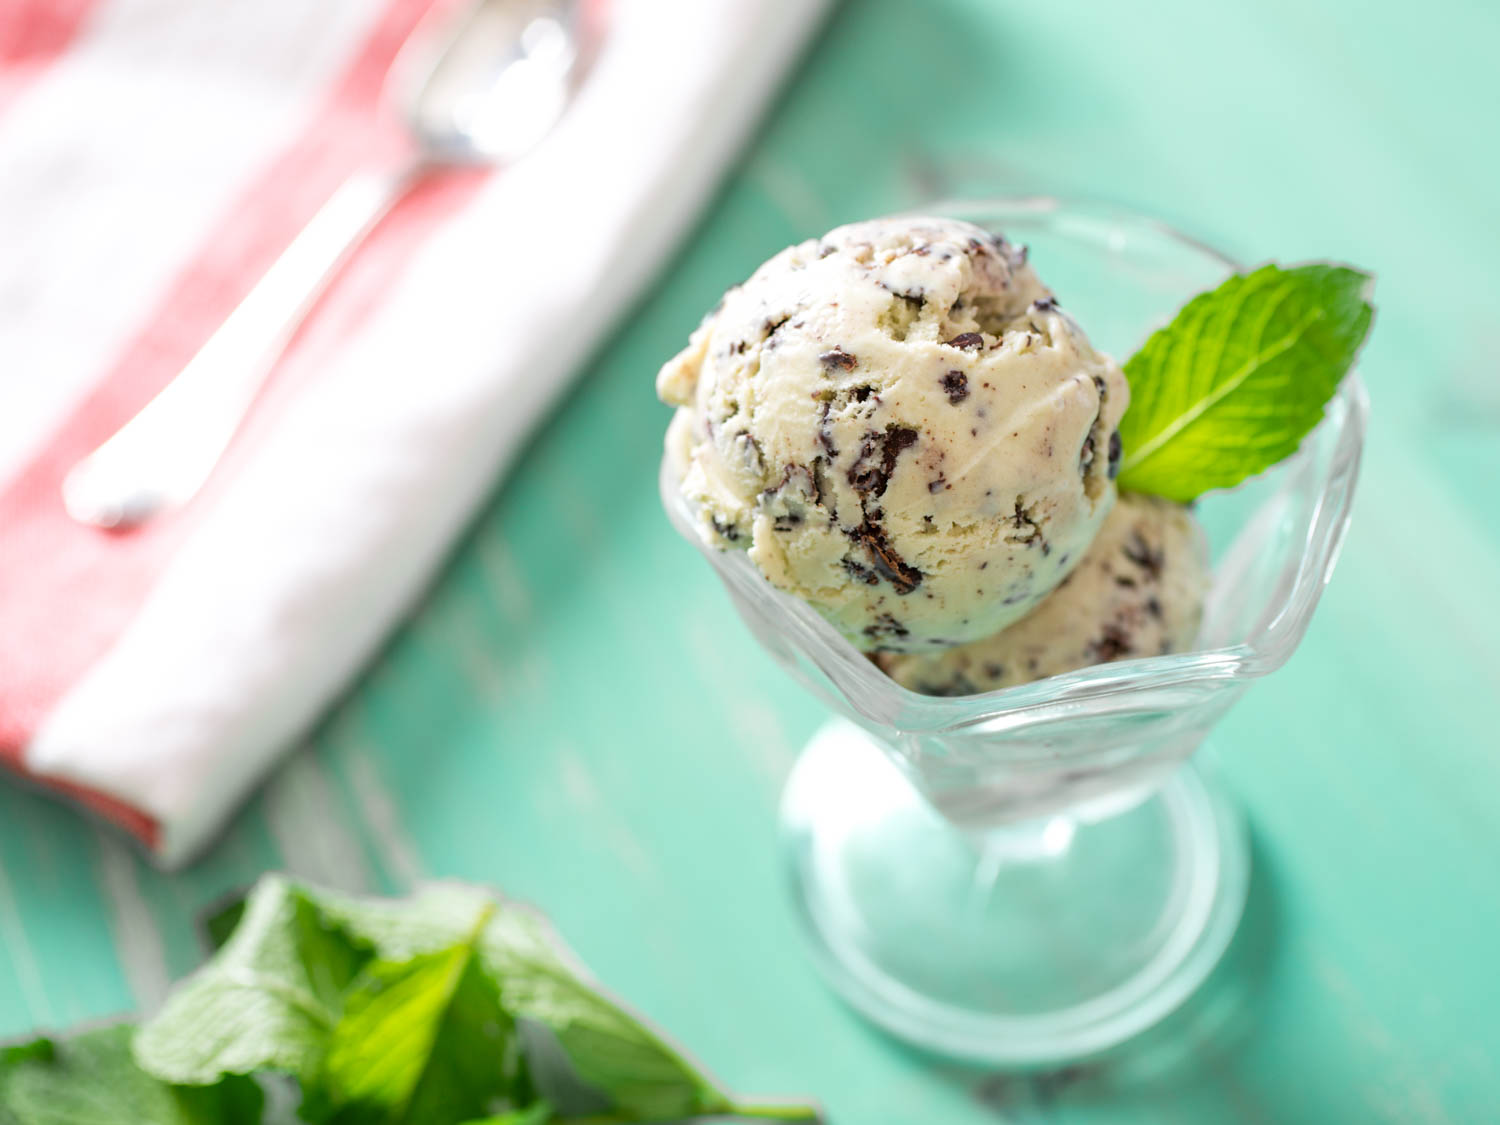 Mint chocolate ice-cream in a glass bowl